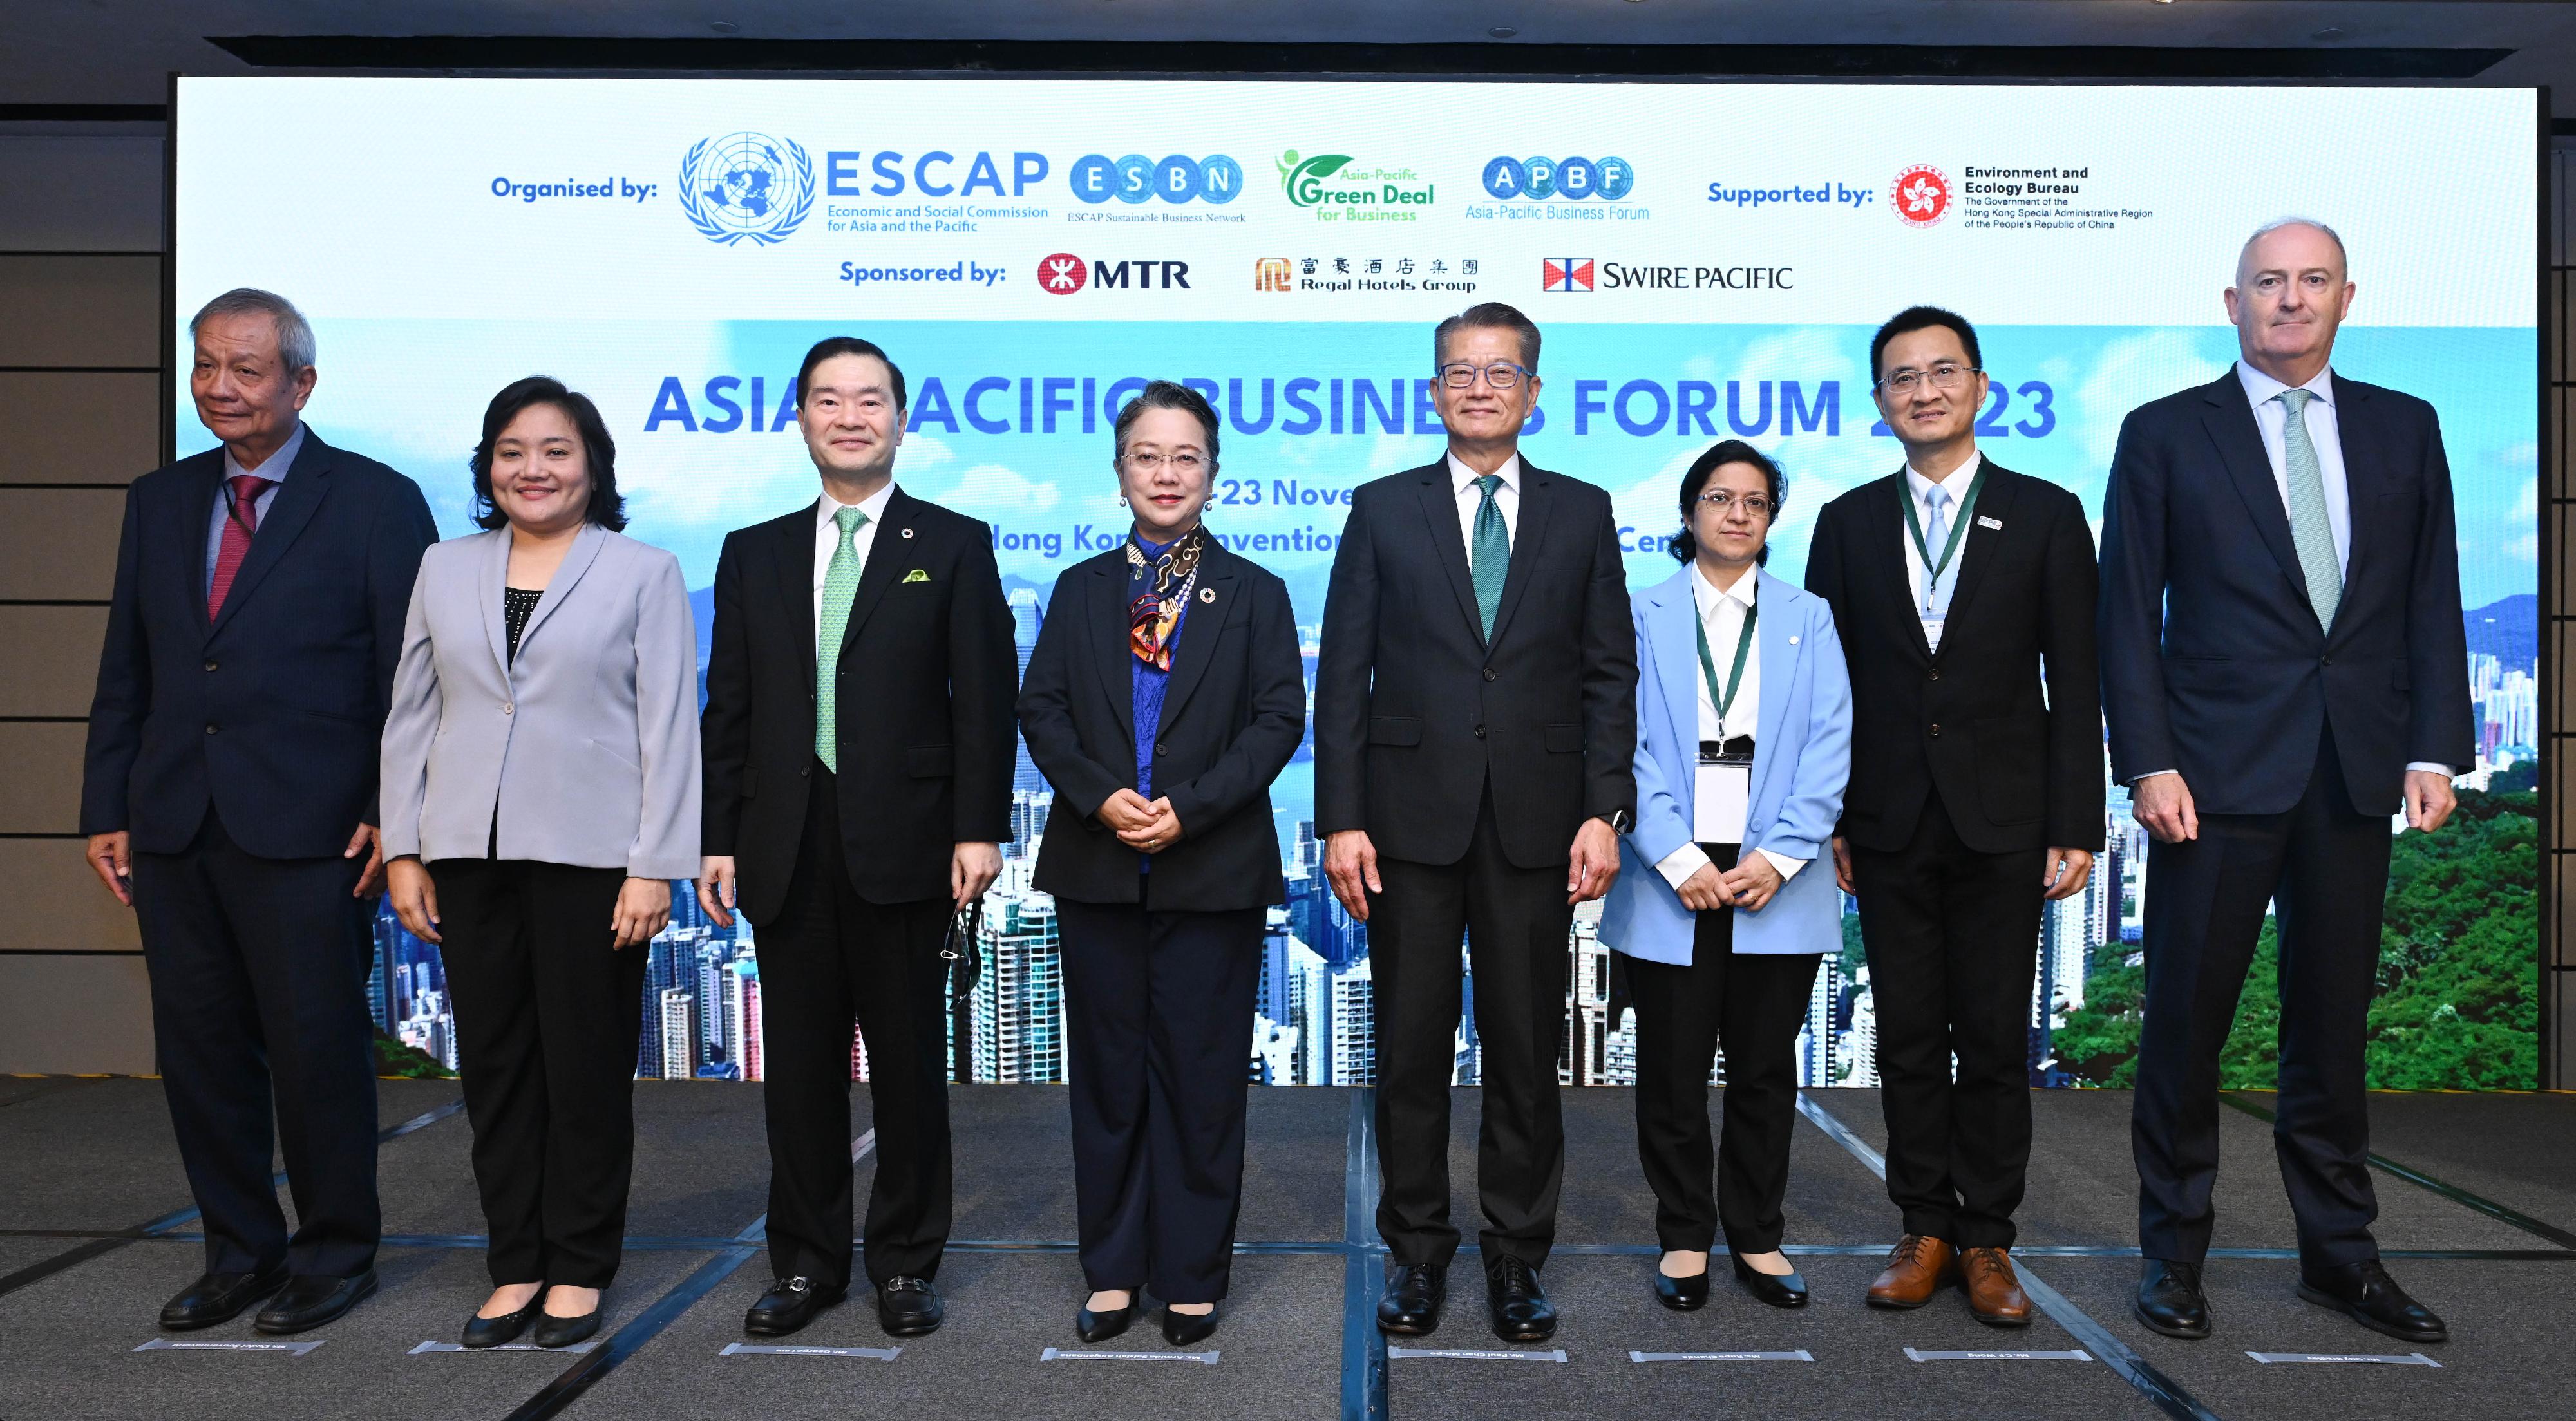 The Financial Secretary, Mr Paul Chan, attended the Asia-Pacific Business Forum 2023 organised by the United Nations Economic and Social Commission for Asia and the Pacific (ESCAP) and the ESCAP Sustainable Business Network (ESBN) this morning (November 22). Photo shows Mr Chan (fourth right); the Commissioner for Climate Change of the Environment and Ecology Bureau, Mr Wong Chuen-fai (second right); the Under-Secretary-General of the United Nations and Executive Secretary of the ESCAP, Ms Armida Salsiah Alisjahbana (fourth left); the Chair of the ESBN, Dr George Lam (third left), and other guests at the forum this morning (November 22).